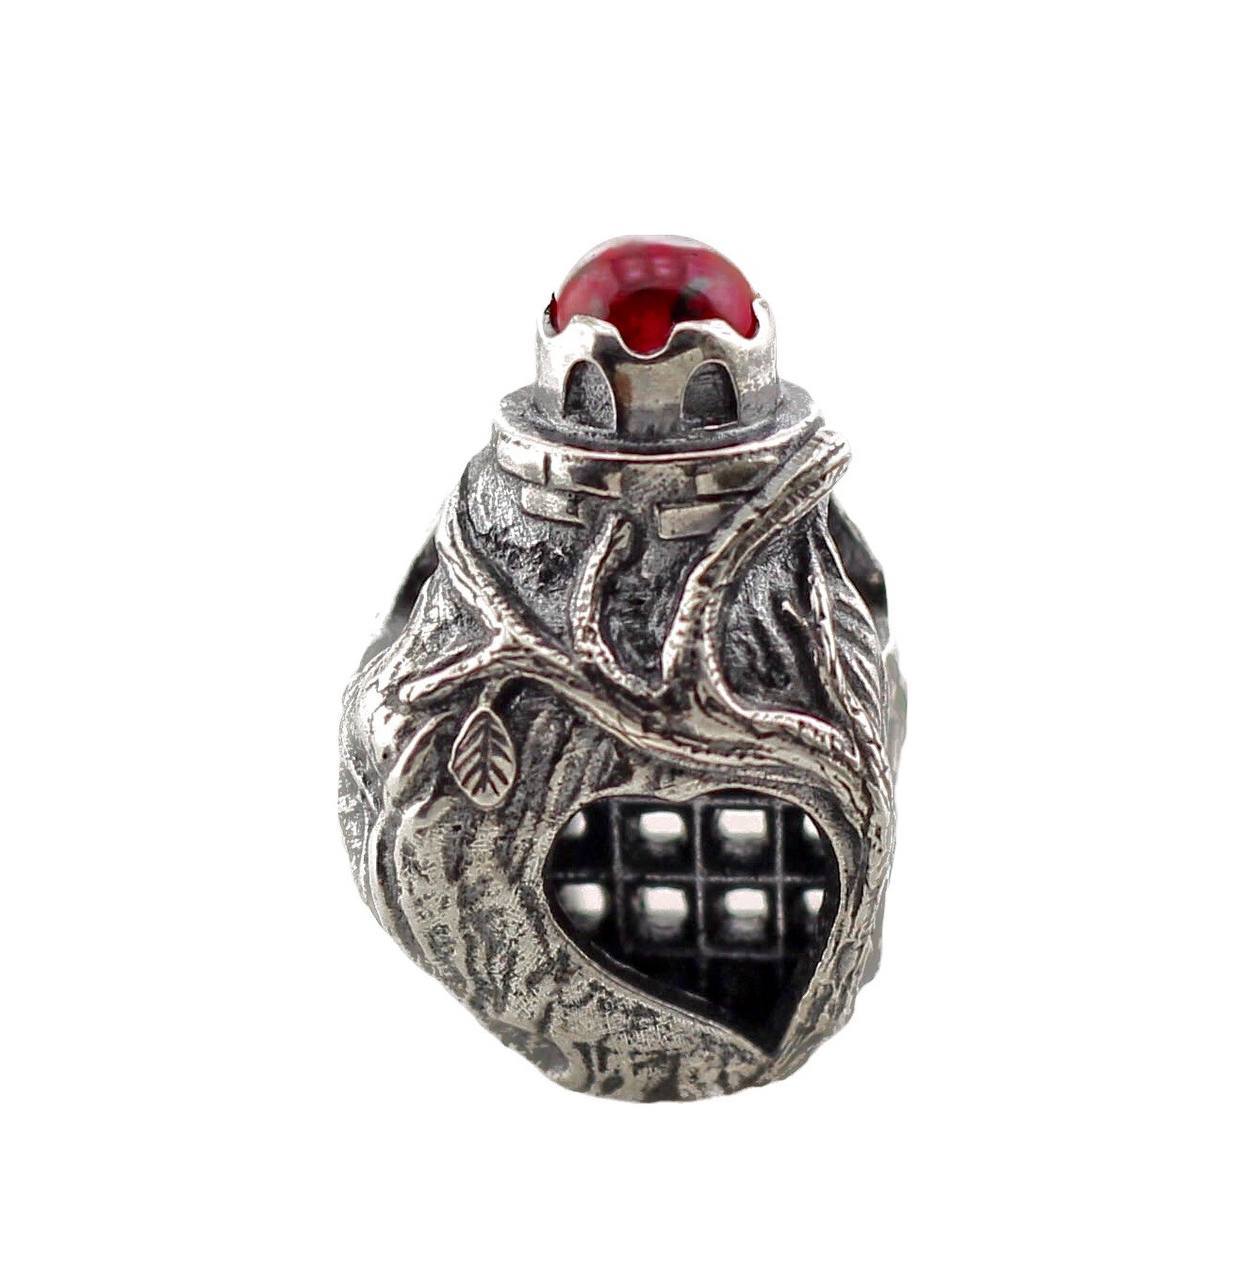 Primary image for Imfando. Silver pendant with cherry rhodolite. The shape of anatomical hearts. 